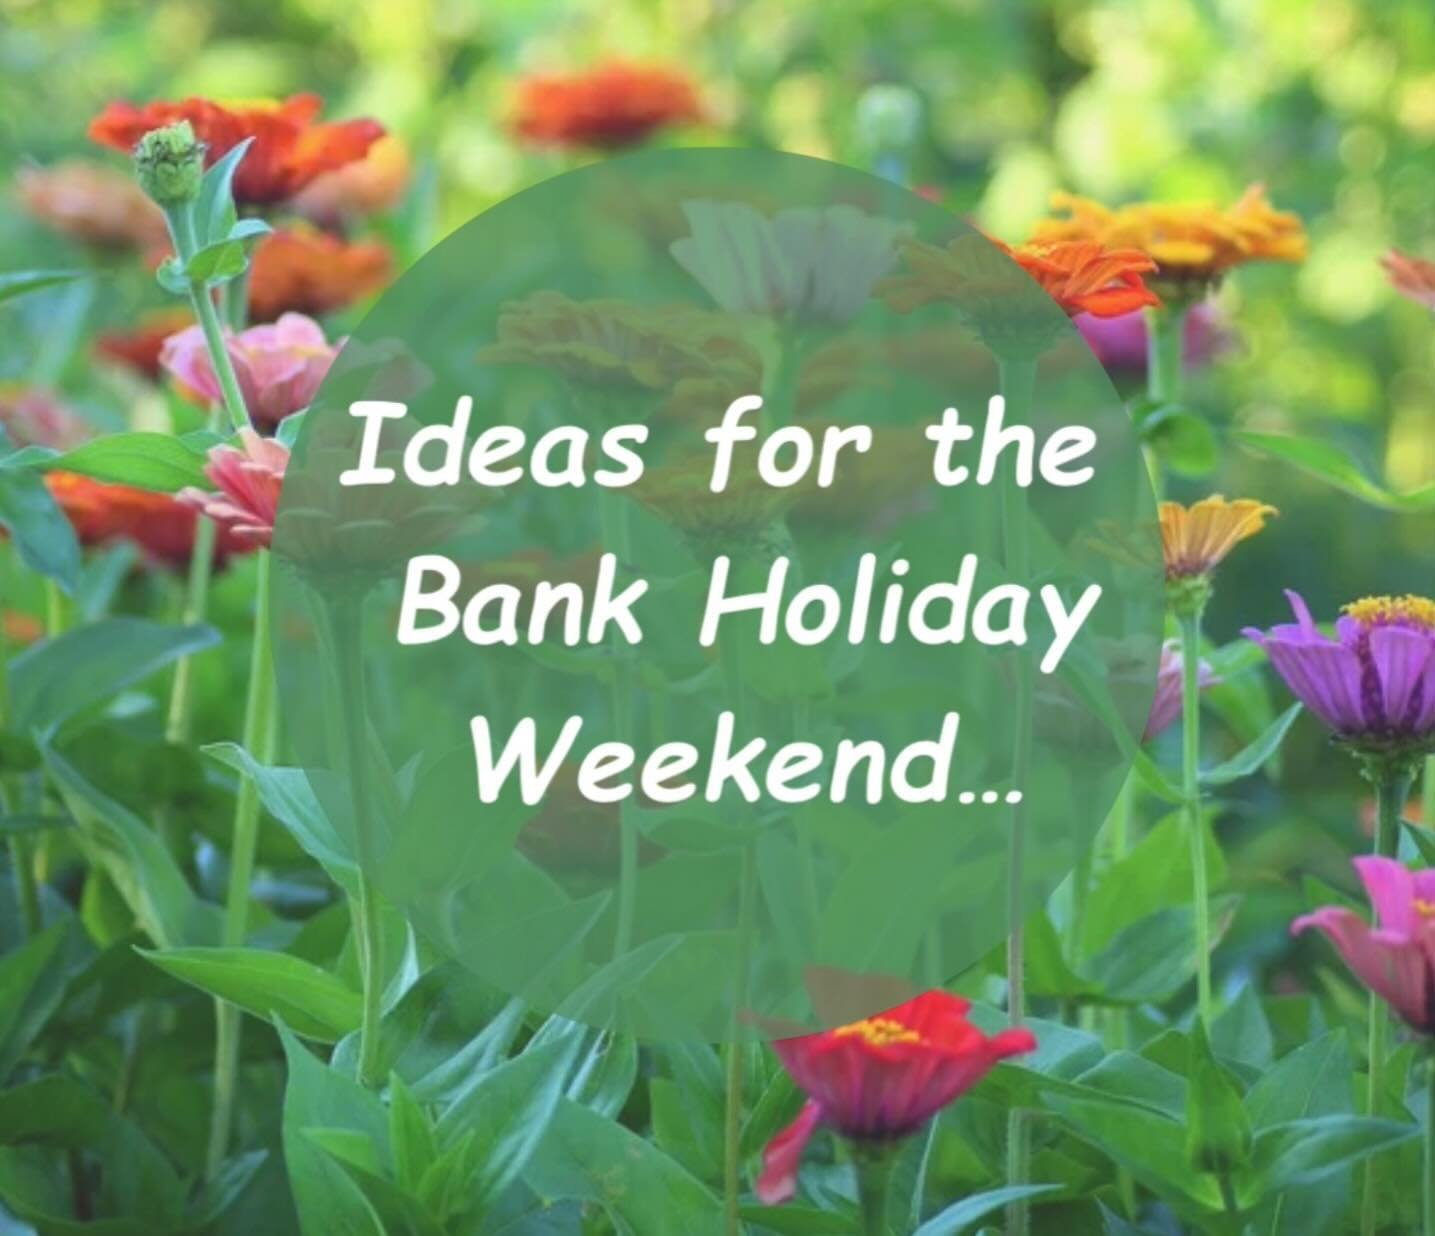 Looking for things to do and places to go this Bank Holiday weekend?
Look no further than #sheffieldbotanicalgardens.&hellip;. 
.
.
.
.
.
.
#bankholiday #bankholidayweekend #booksale #plantsale #artexhibition #ourfaveplaces #theoutdoorcity #sheffield